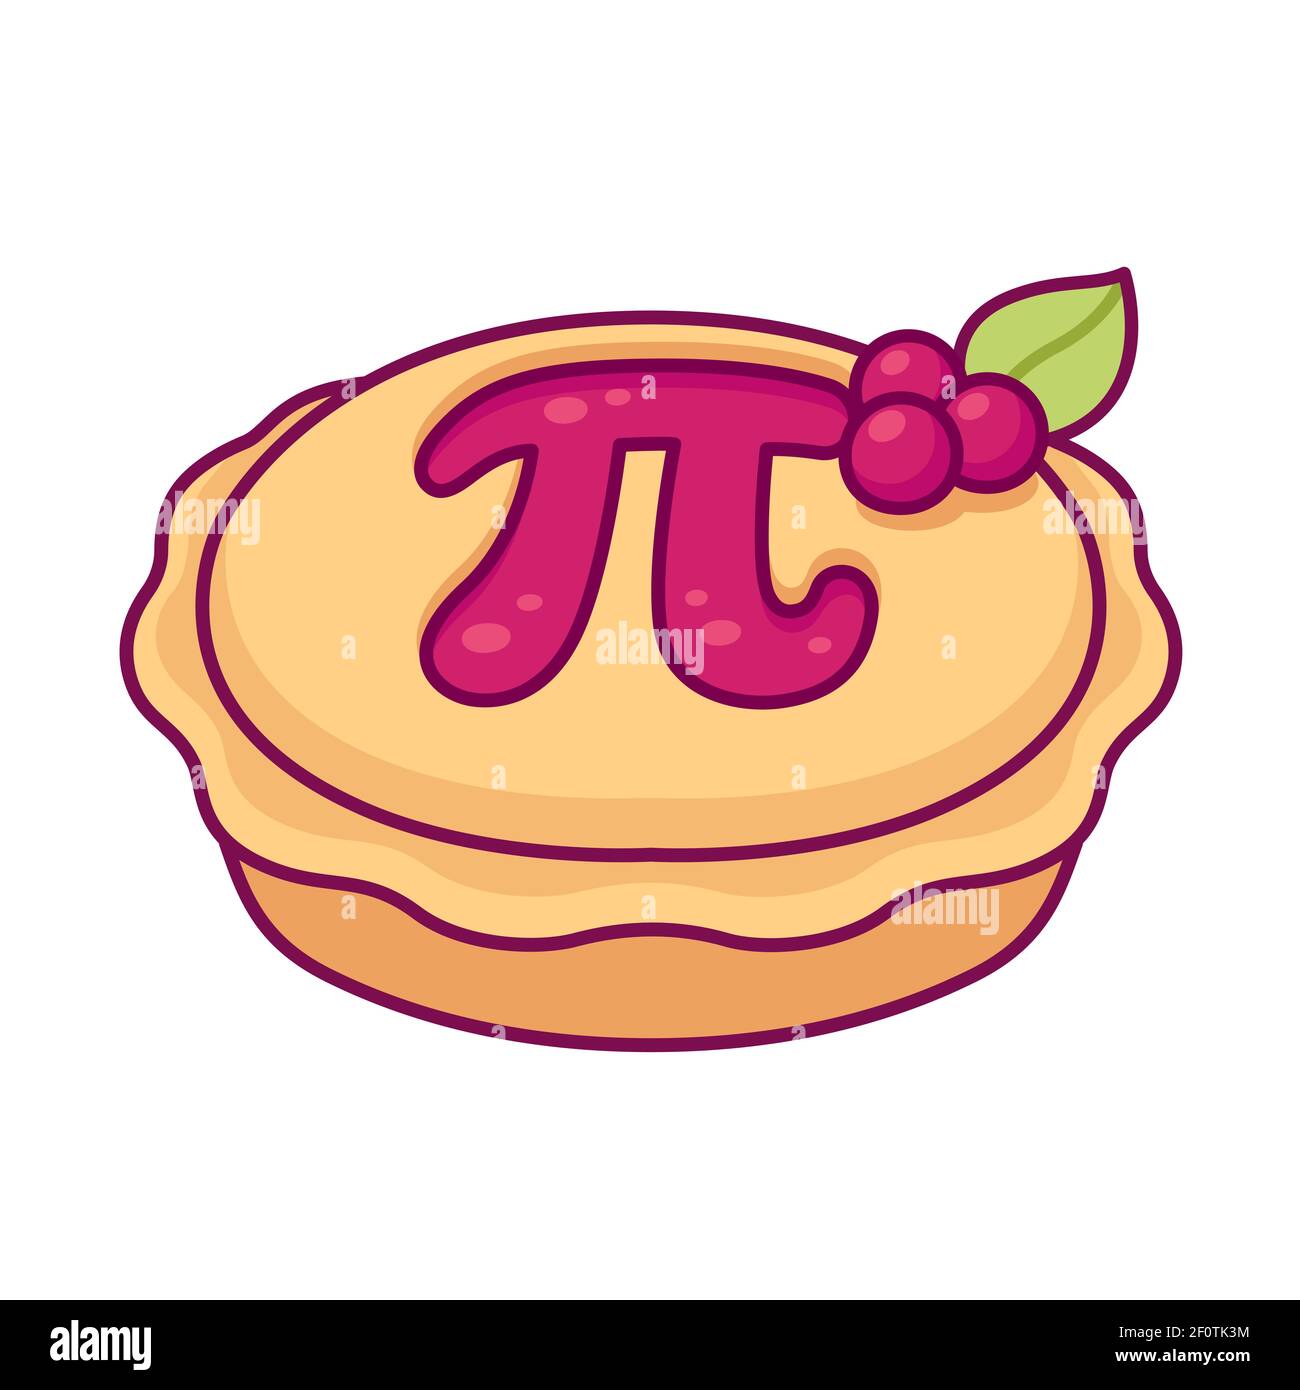 Sweet cherry pie with greek letter Pi, maths symbol. Cute cartoon drawing, vector clip art illustration. 3.14 (March 14) International Pi day. Stock Vector